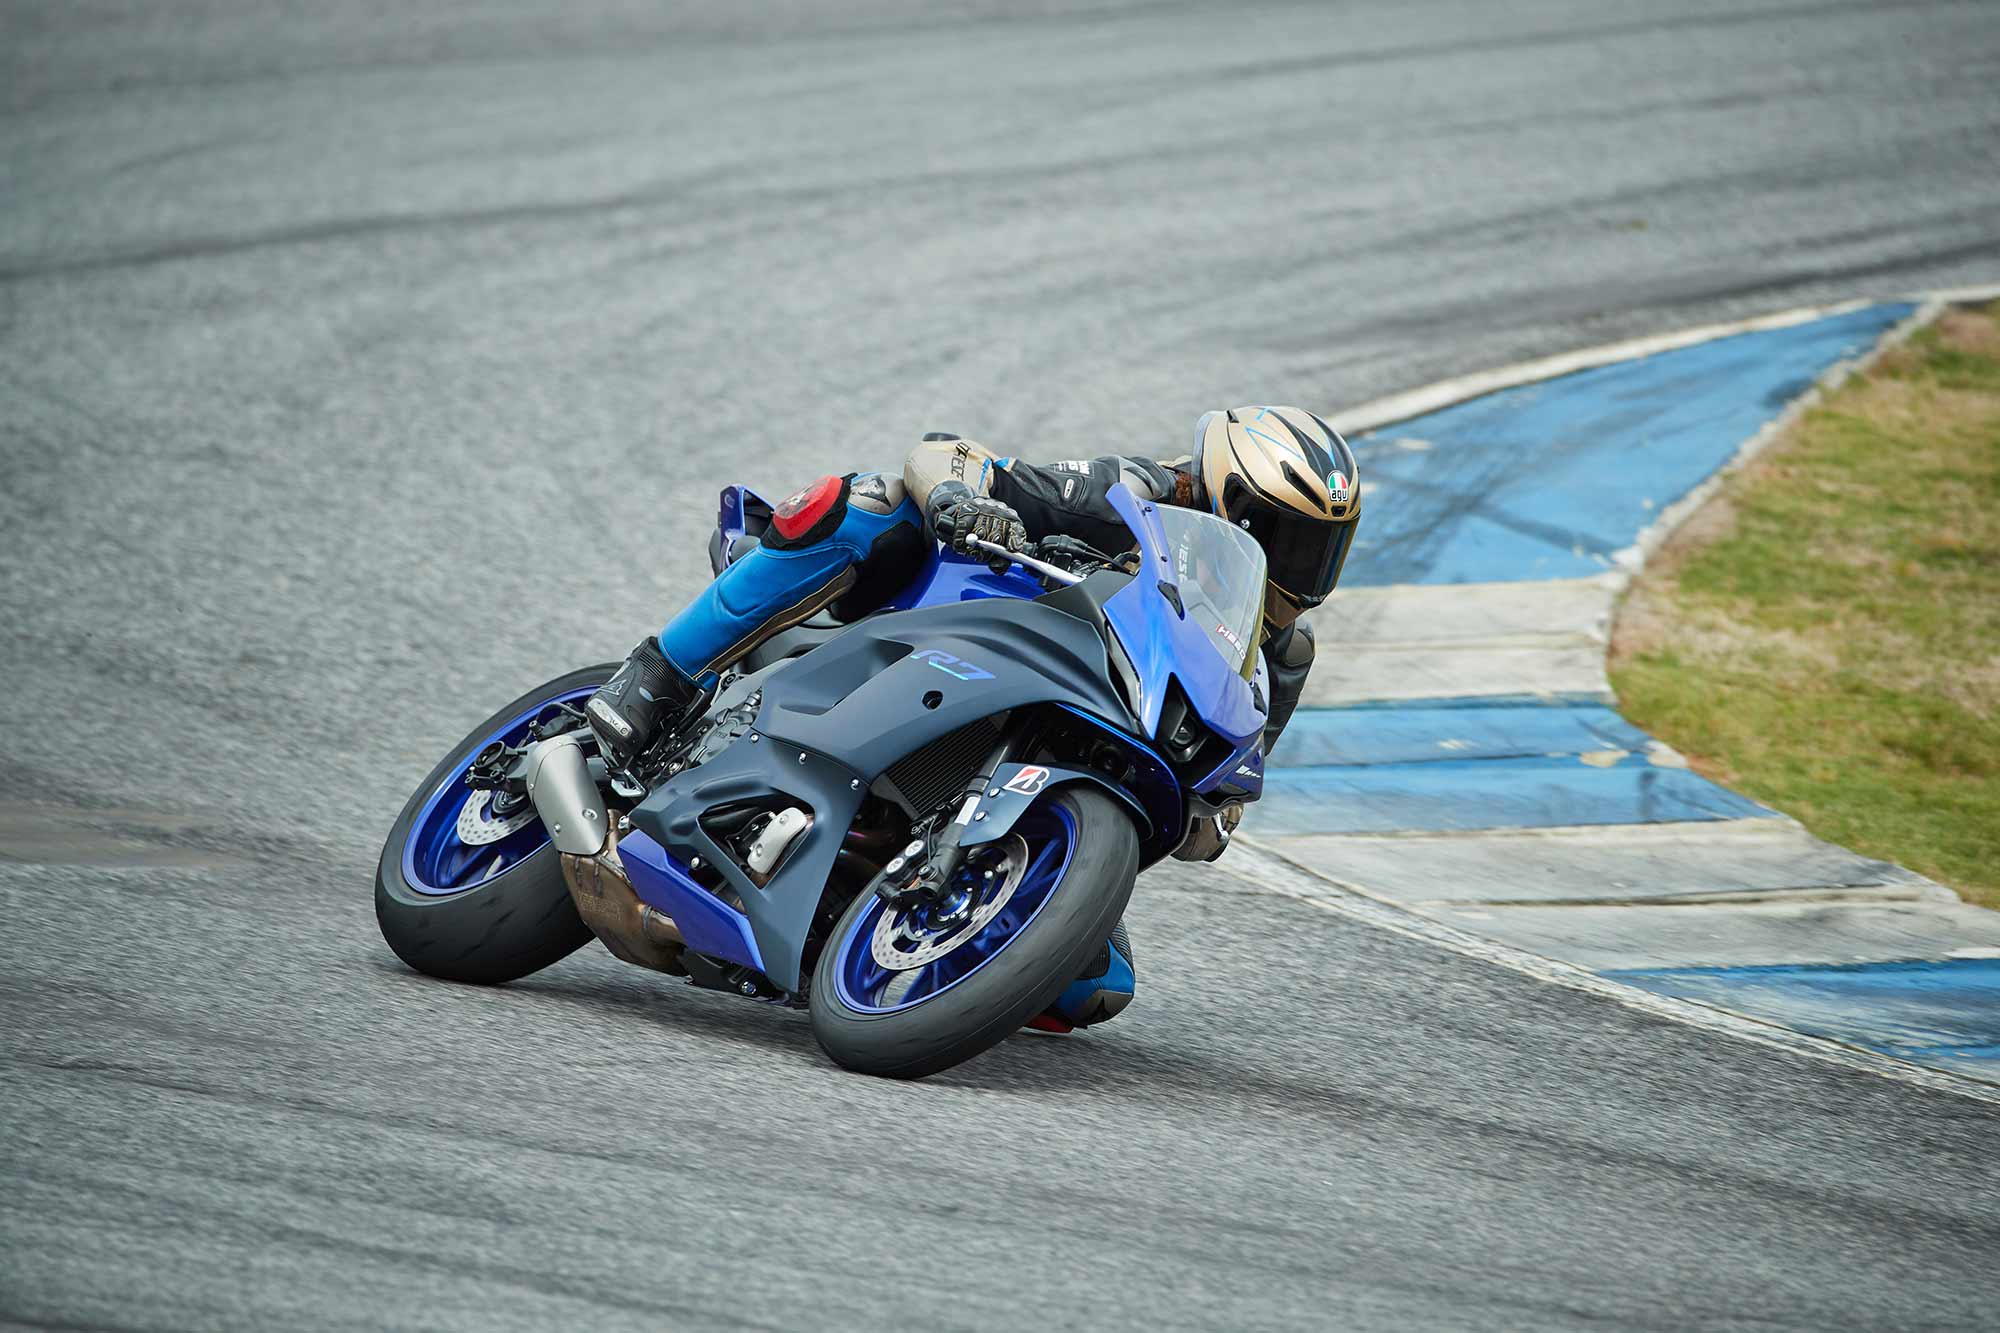 Yamaha's 2022 YZF-R7 Motorcycle Is a $9,000 Breath of Fresh Air